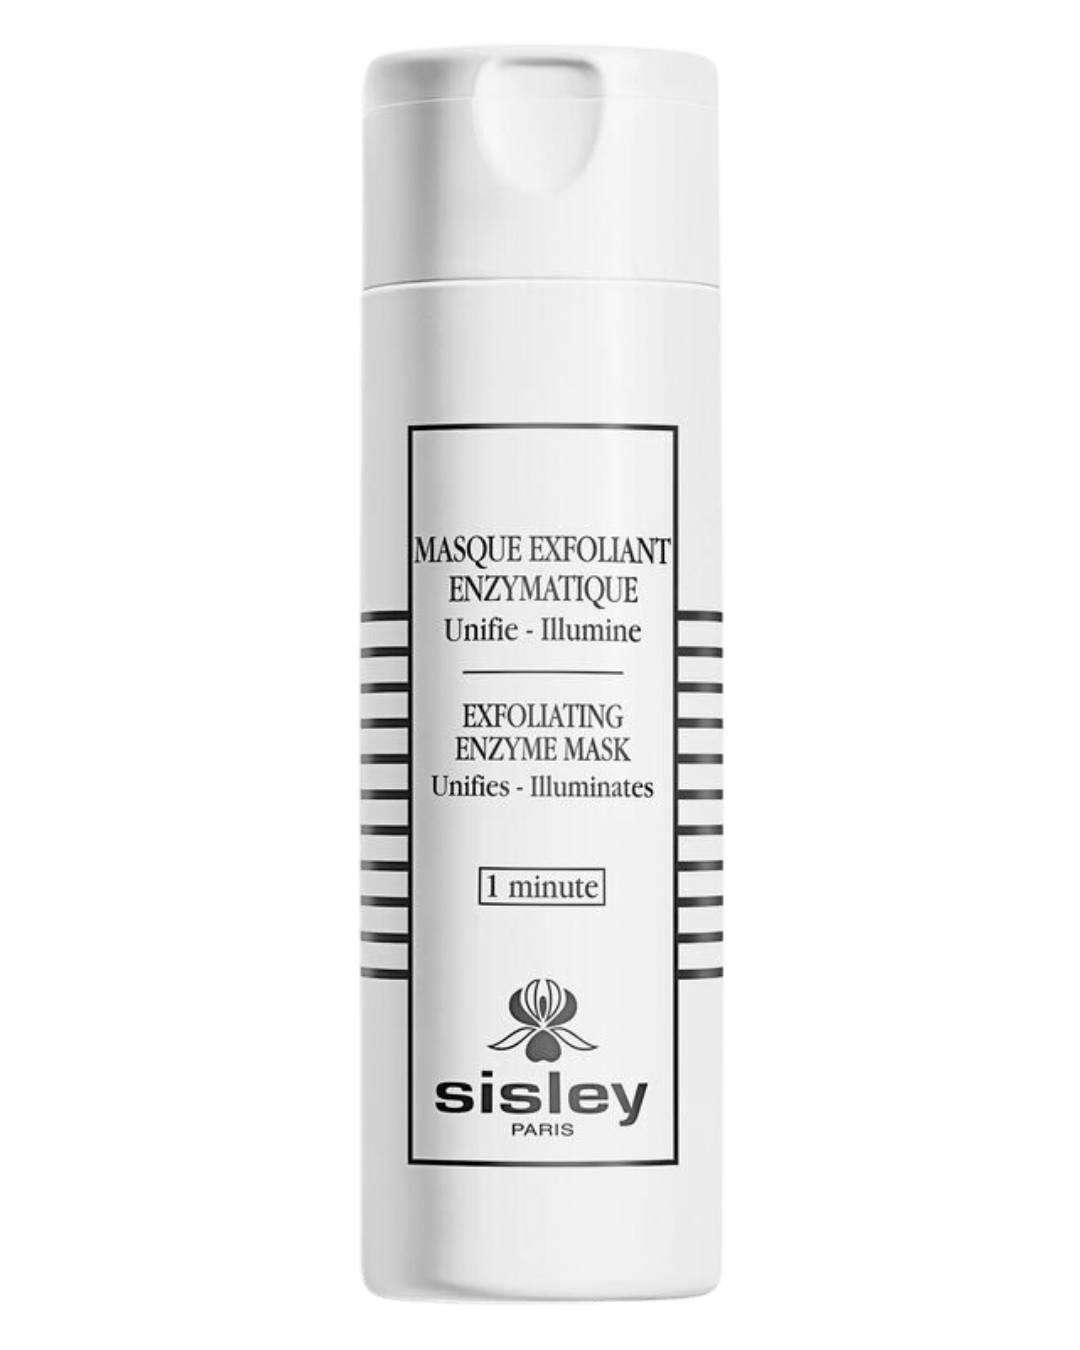 Daily Vanity Beauty Awards 2024 Best Skincare Sisley Paris Exfoliating Enzyme Mask Voted By Beauty Experts